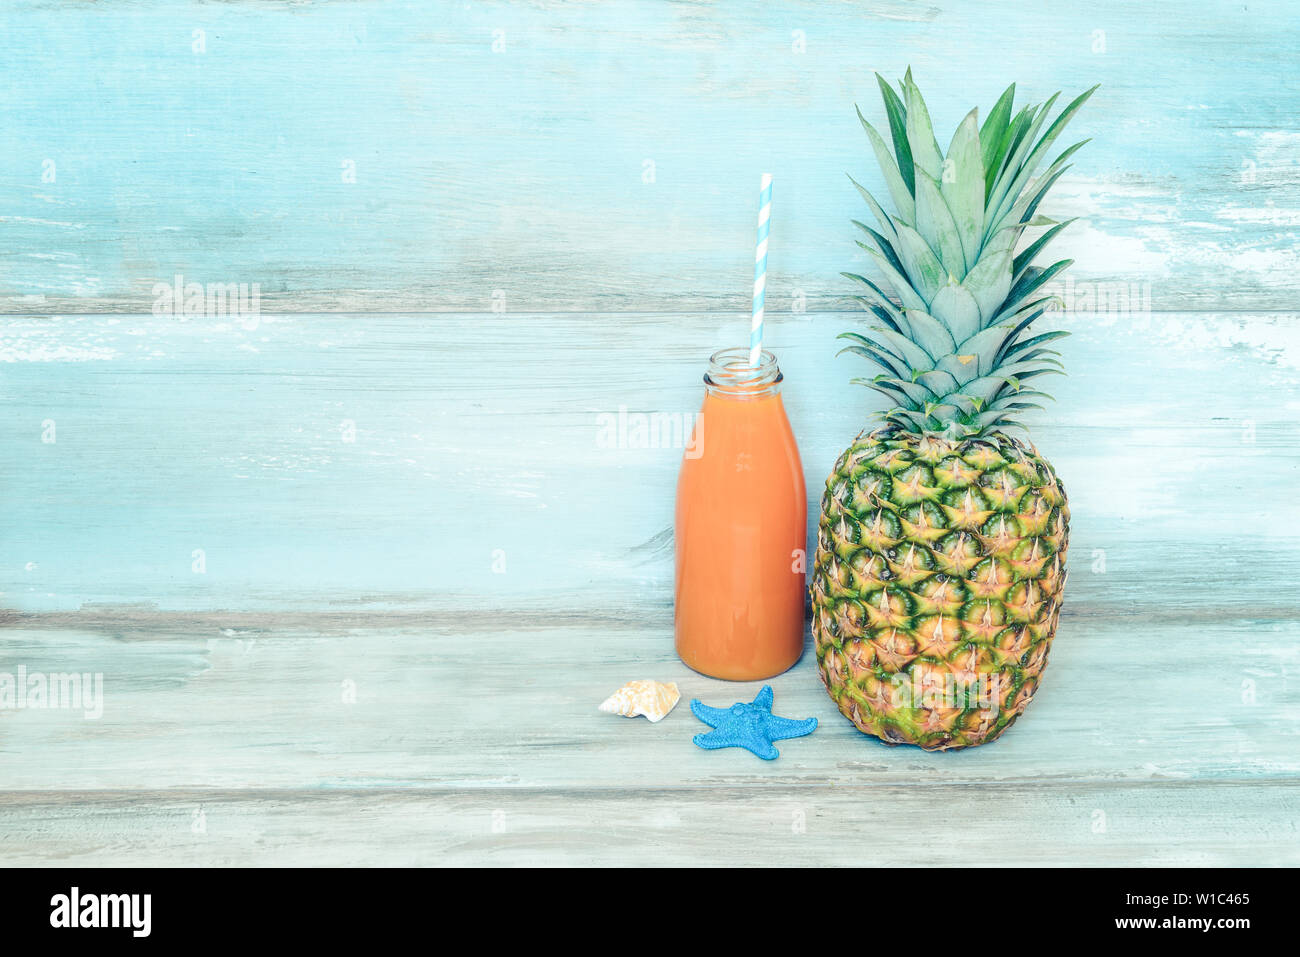 Summer concept stillife - ripe pineapple and a bottle of multivitamin juice in front of a blue rustic wooden background. Stock Photo